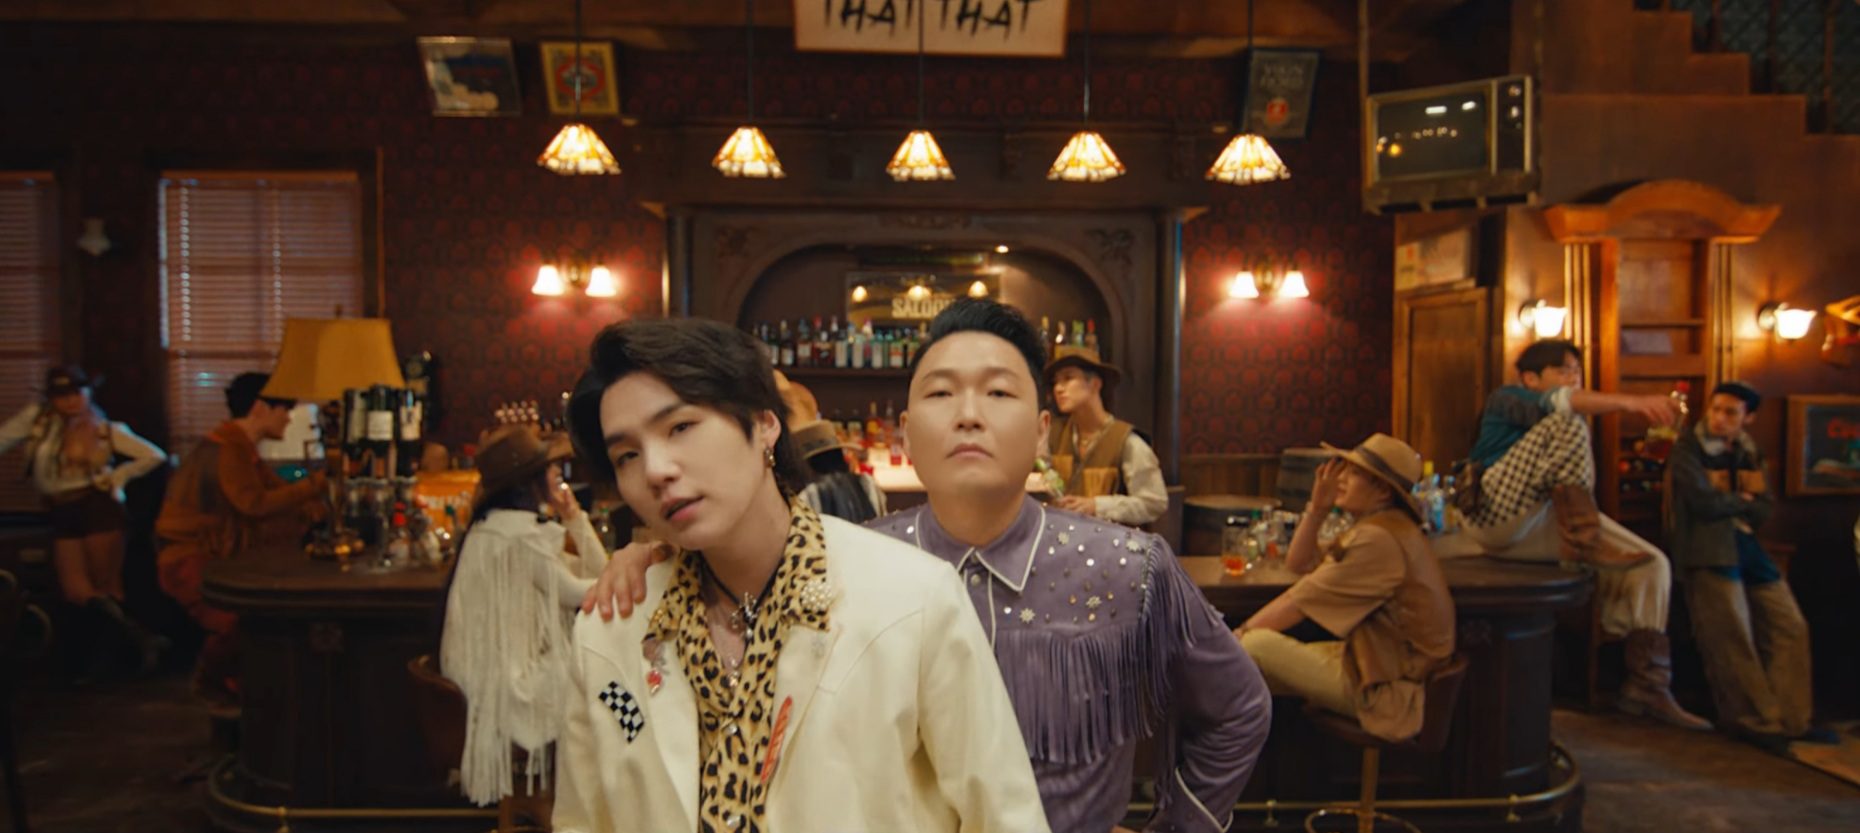 Suga and PSY In That That